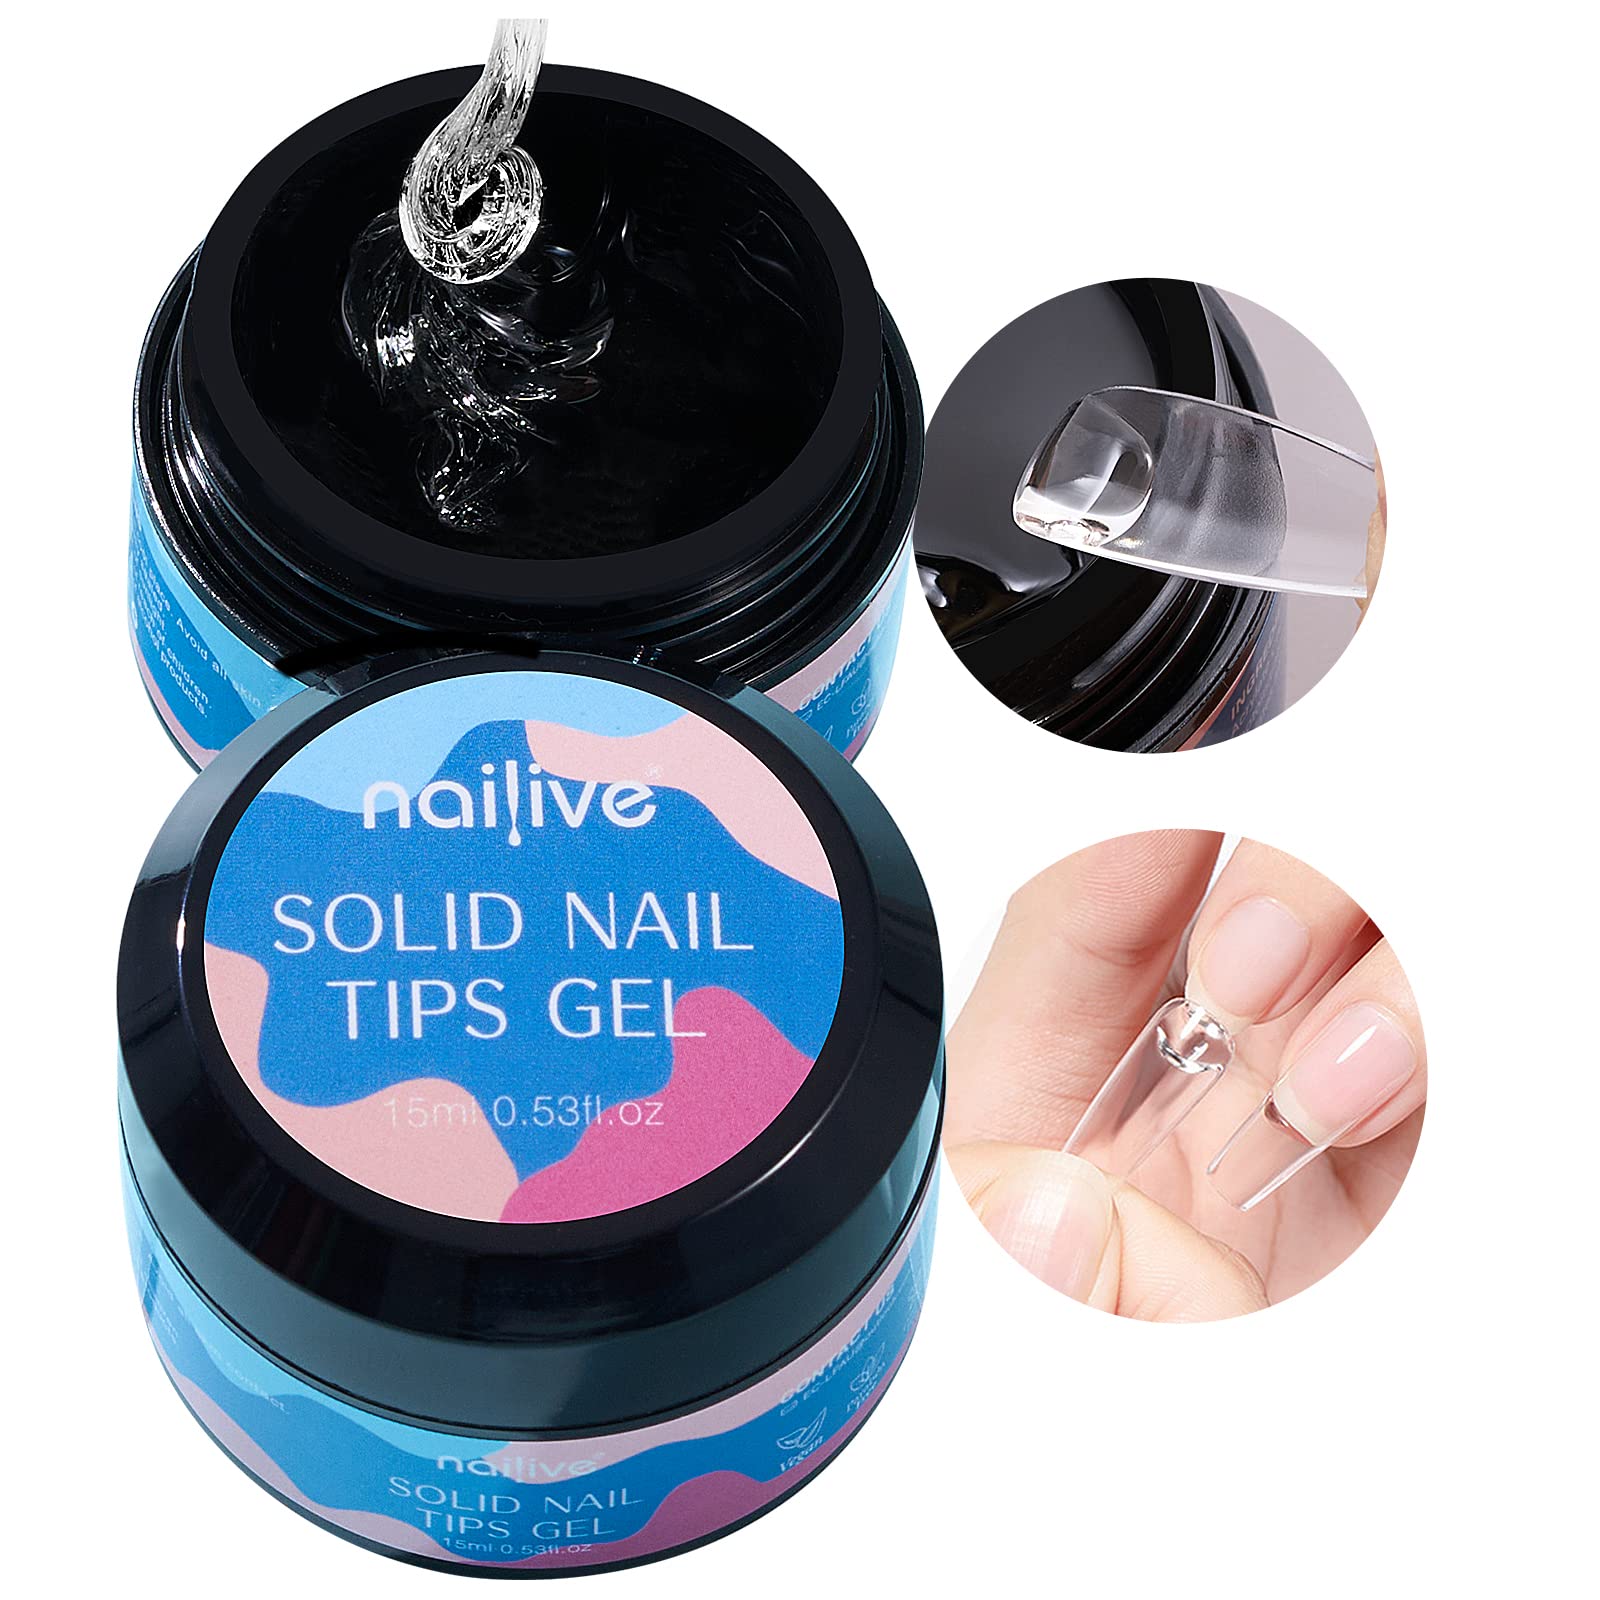 Nailive Solid Nail Glue Gel, 3 in 1 Nail Tips Glue Curing for Acrylic  Nails, Rhinestone Acrylic Press on Solid Glue Gel & Nail Art, Easy DIY at  Home, 15ML(Pack of 2) 2×15ml